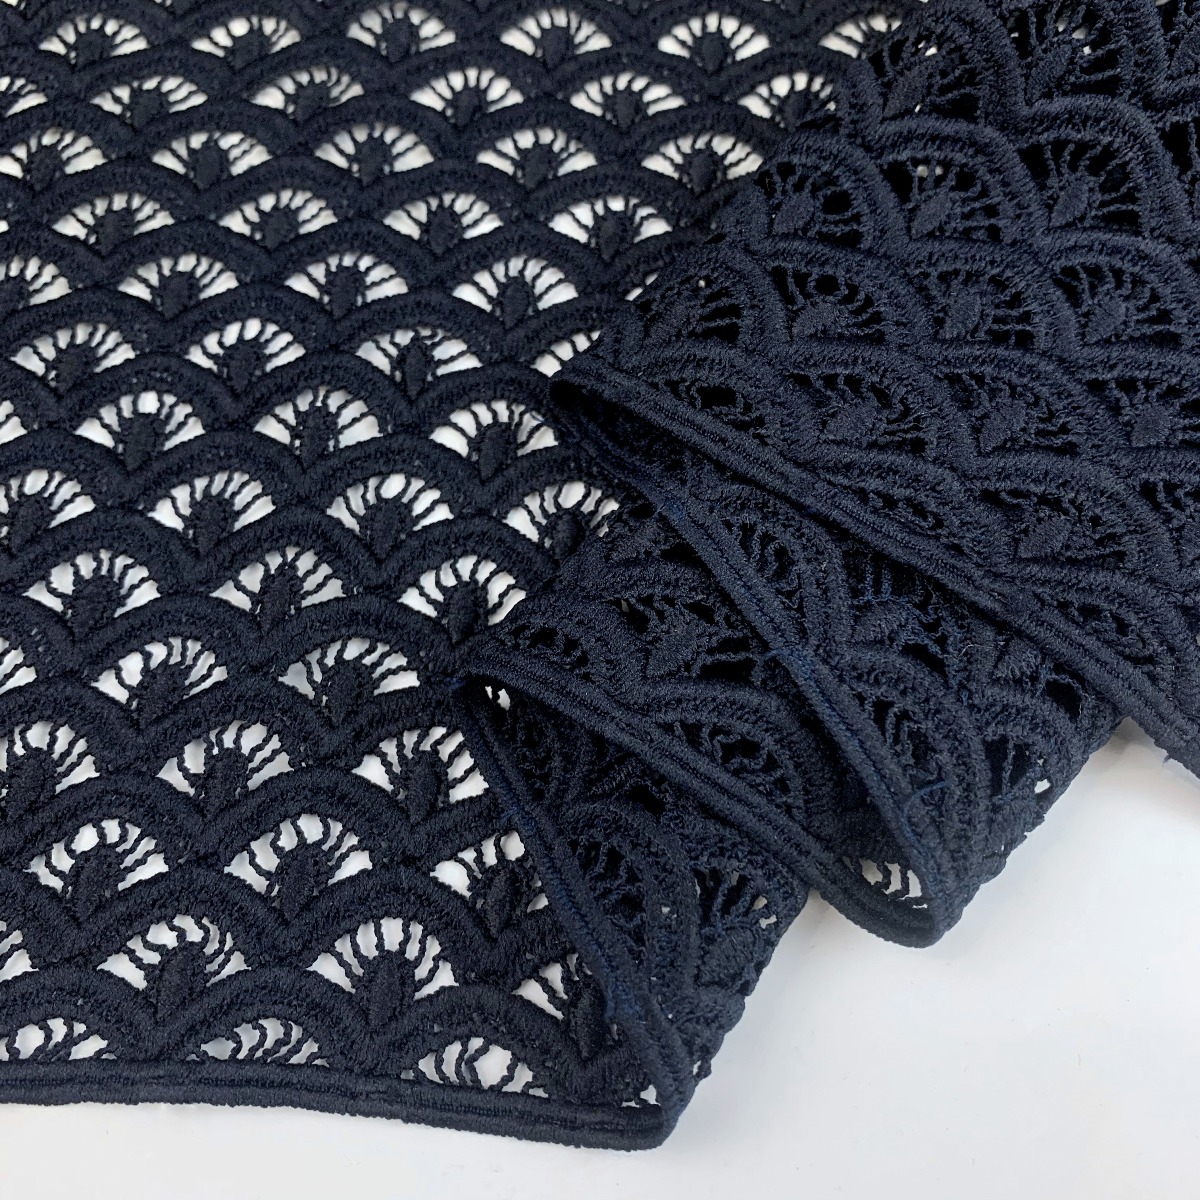 https://www.croftmill.co.uk/images/pictures/2-2021/08-august-2021-2/hope-dark-navy-geometric-guipure-lace-fabric-for-special-occasions-fold-2.jpg?v=7de6720a